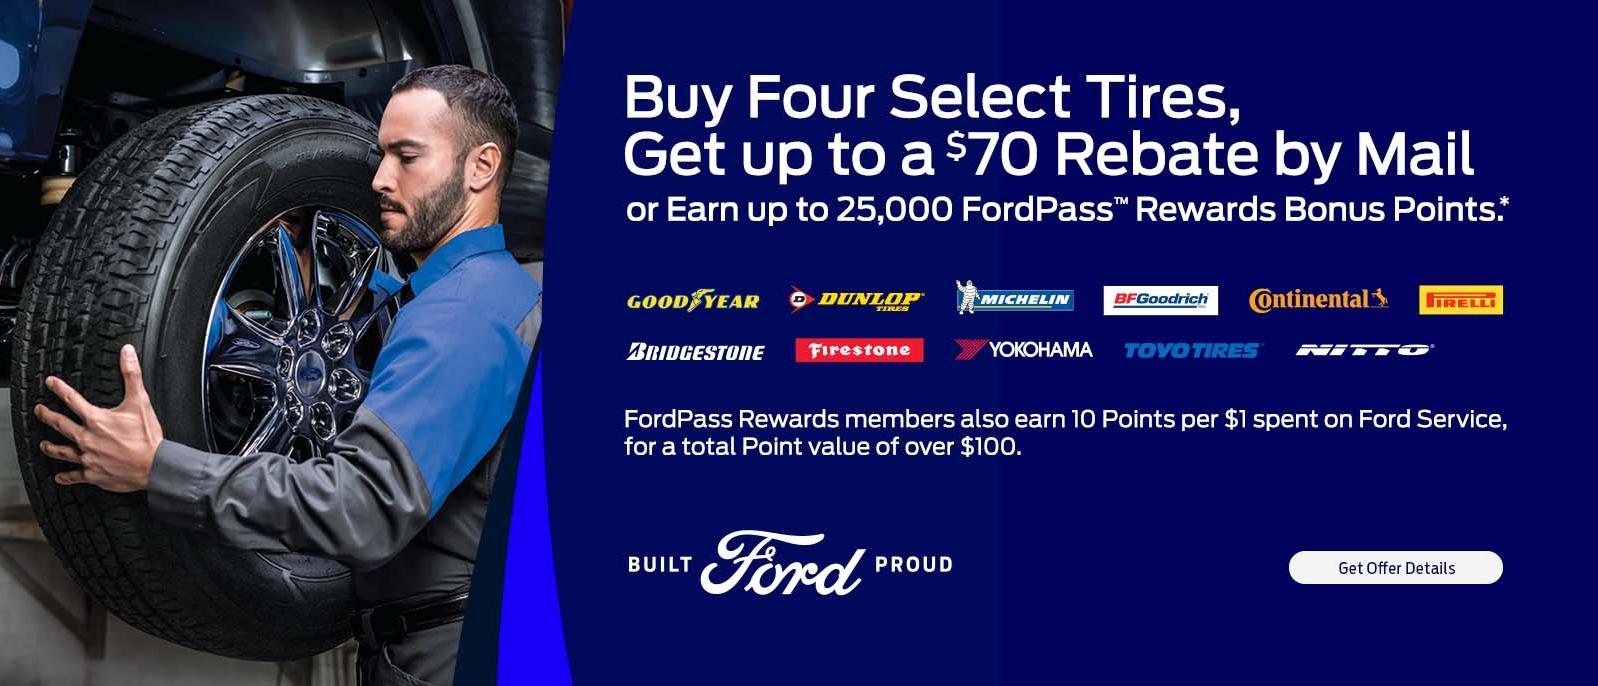 Buy Four Select Tires Get A 70 Rebate By Mail